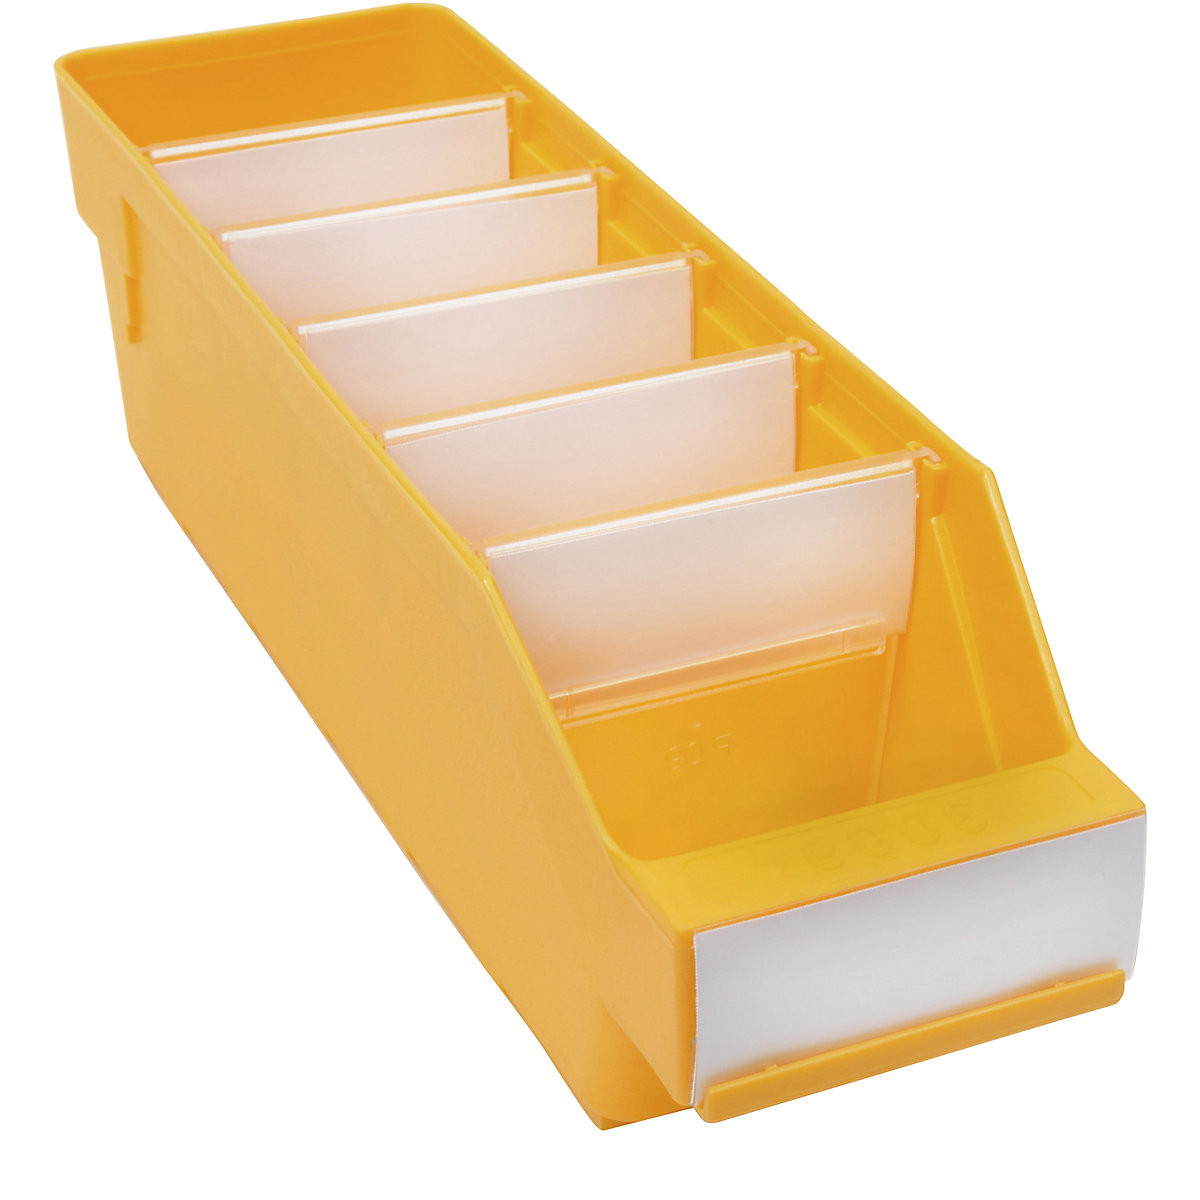 Shelf bin made of highly impact resistant polypropylene – STEMO, yellow, LxWxH 300 x 90 x 95 mm, pack of 40-6